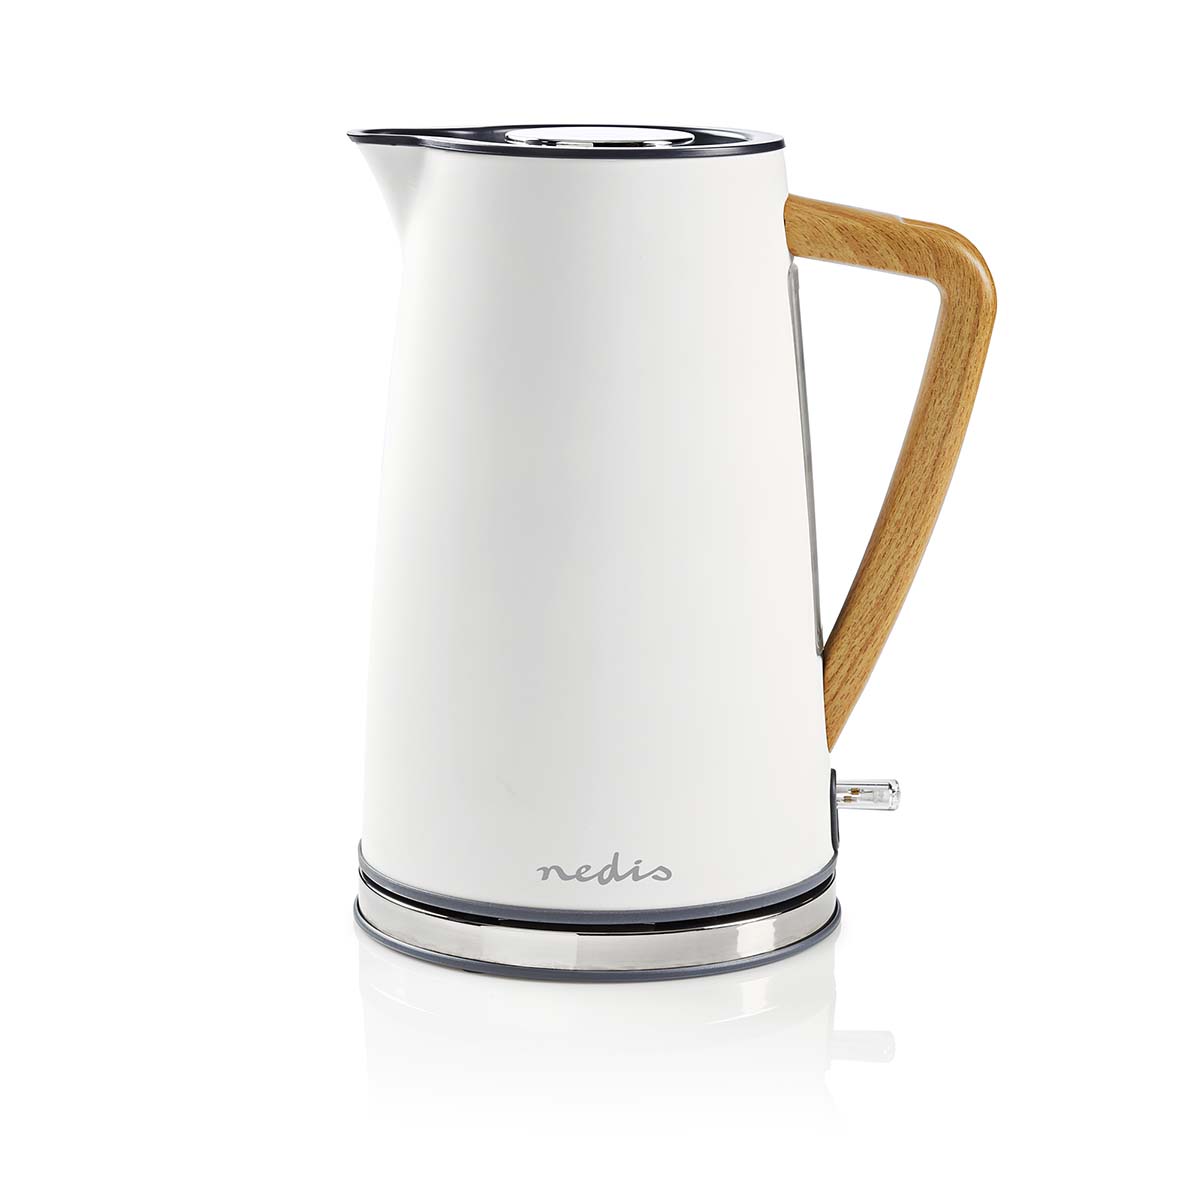 how to operate electric kettle